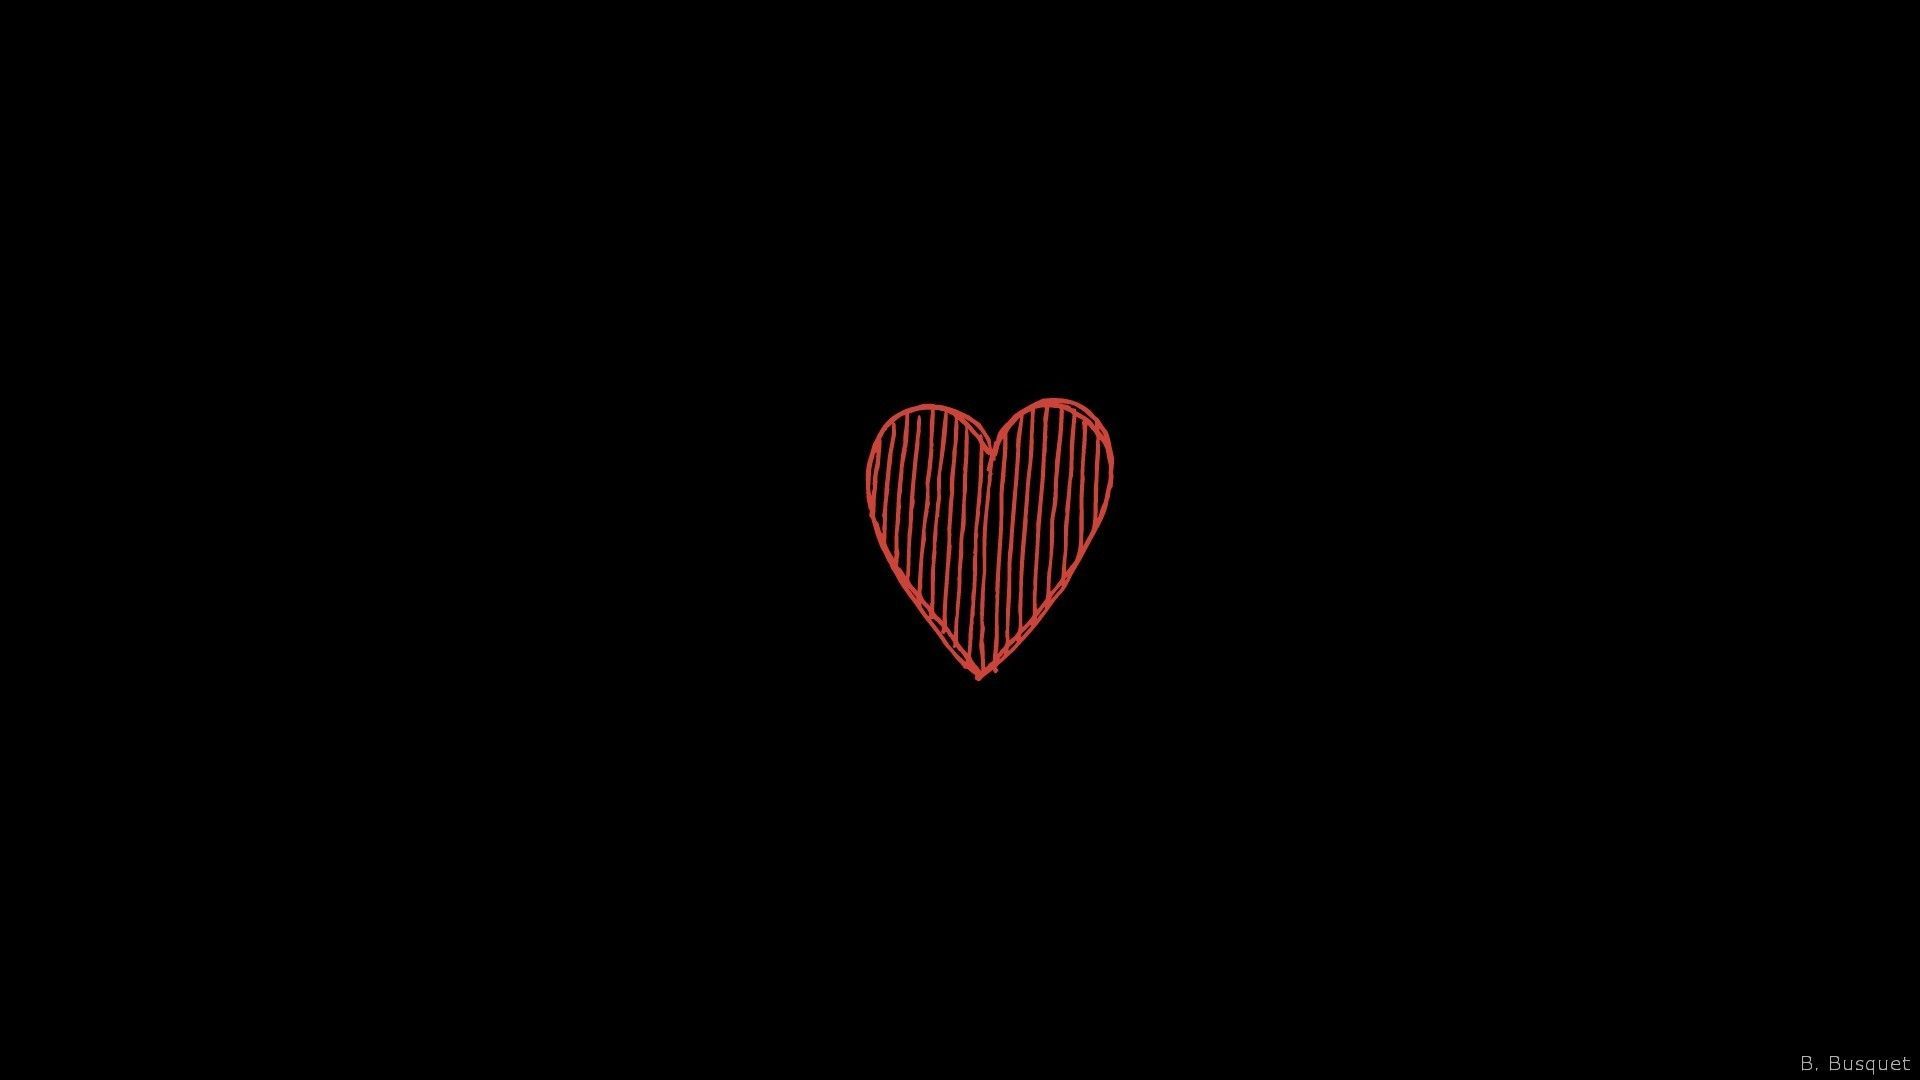 A red heart on a black background - Black heart